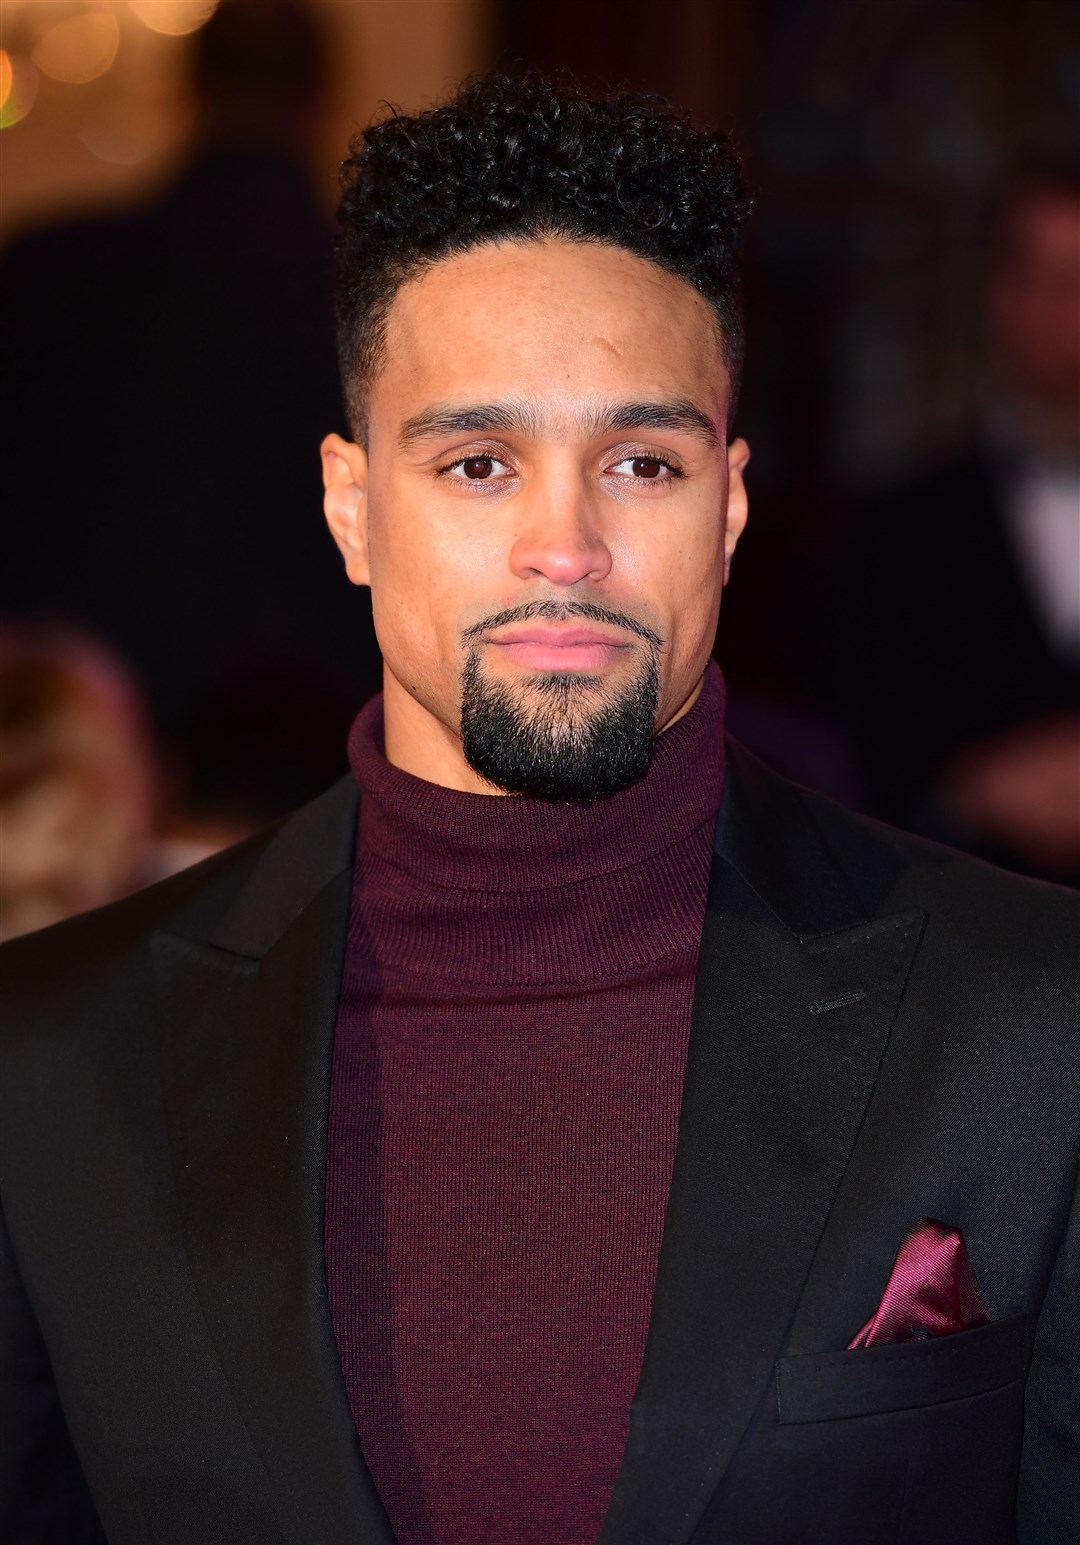 Ashley Banjo from Diversity was phoned by Meghan and Harry after their BLM tribute performance (Ian West/PA)